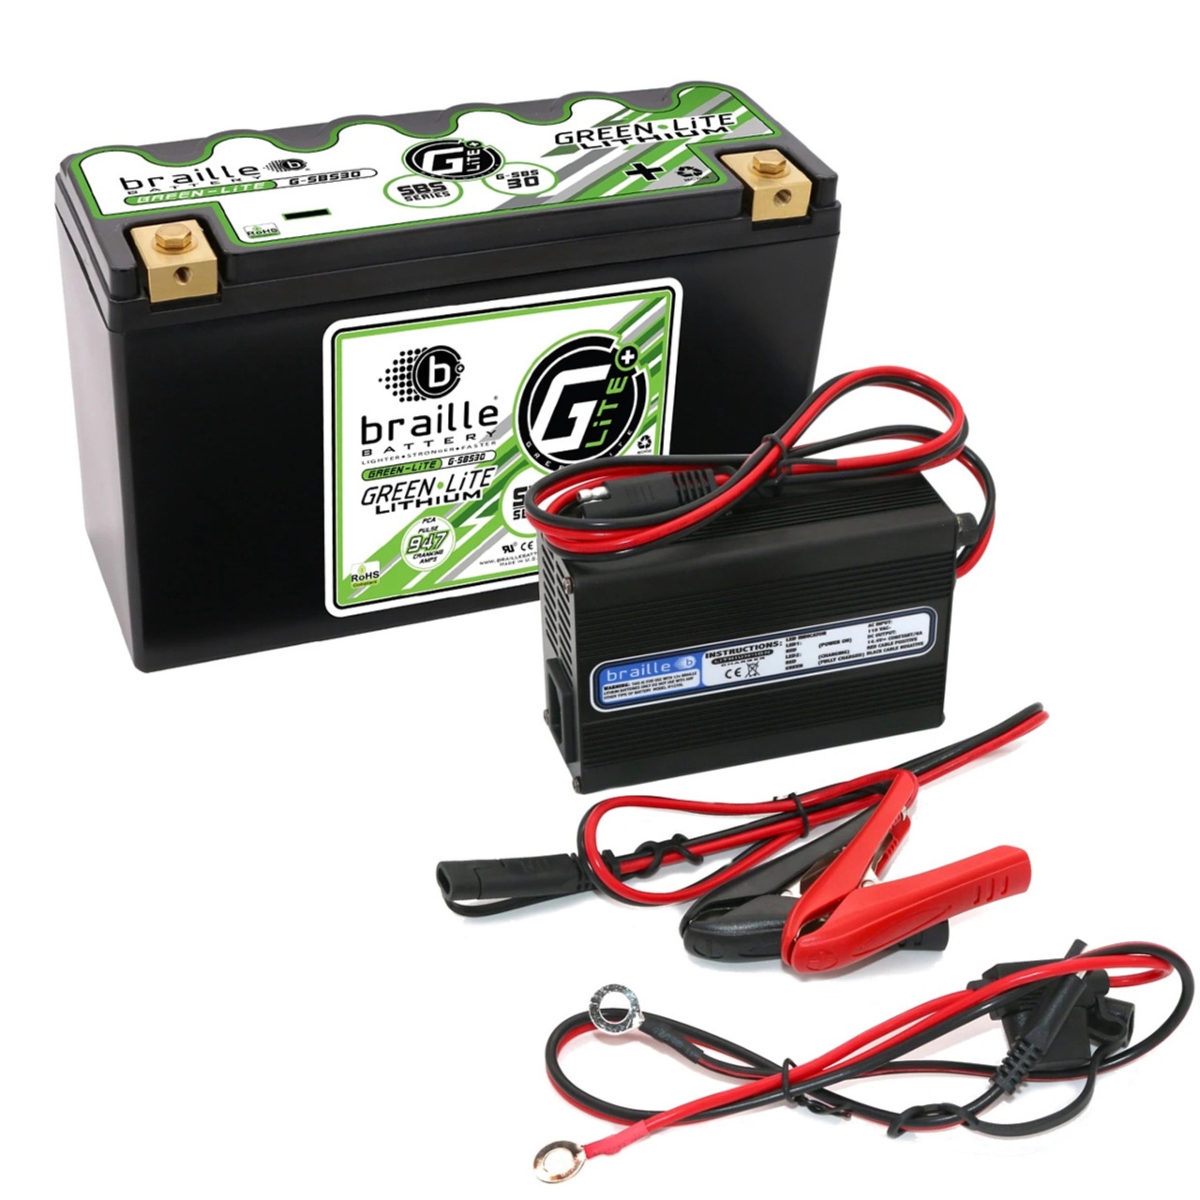 Picture of Braille Auto Battery BRBG-SBS30 947A Green-Lite Lithium G-SBC30 Battery